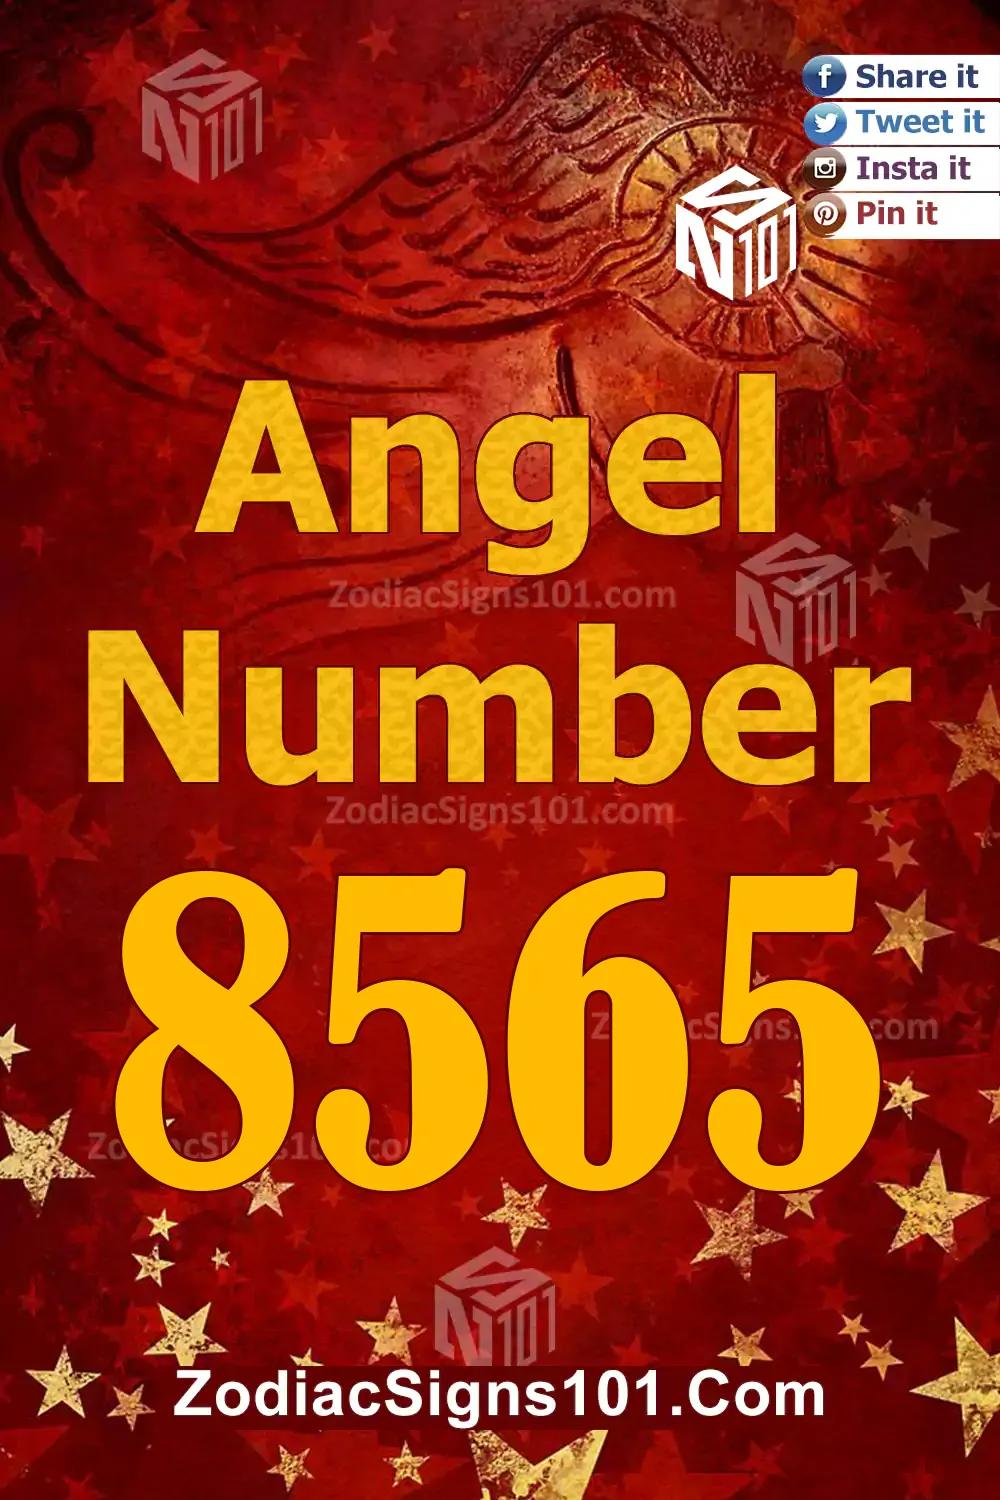 8565 Angel Number Meaning